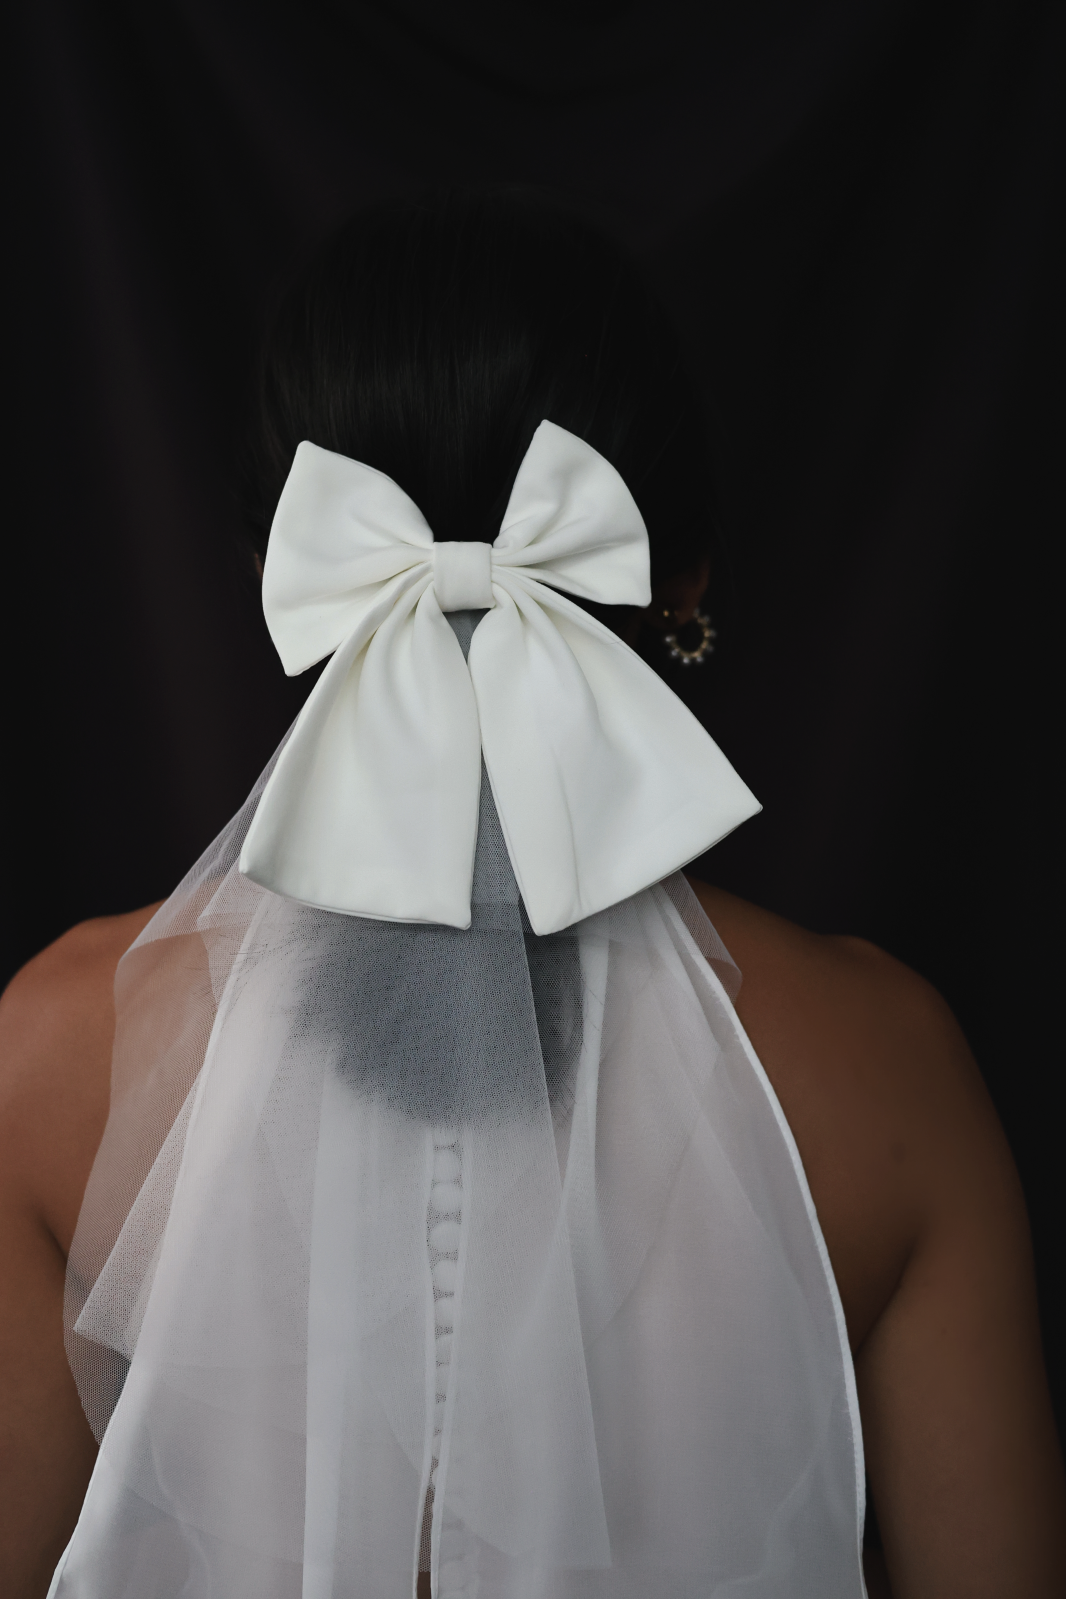 The Timeless Appeal Of The Hair Bow